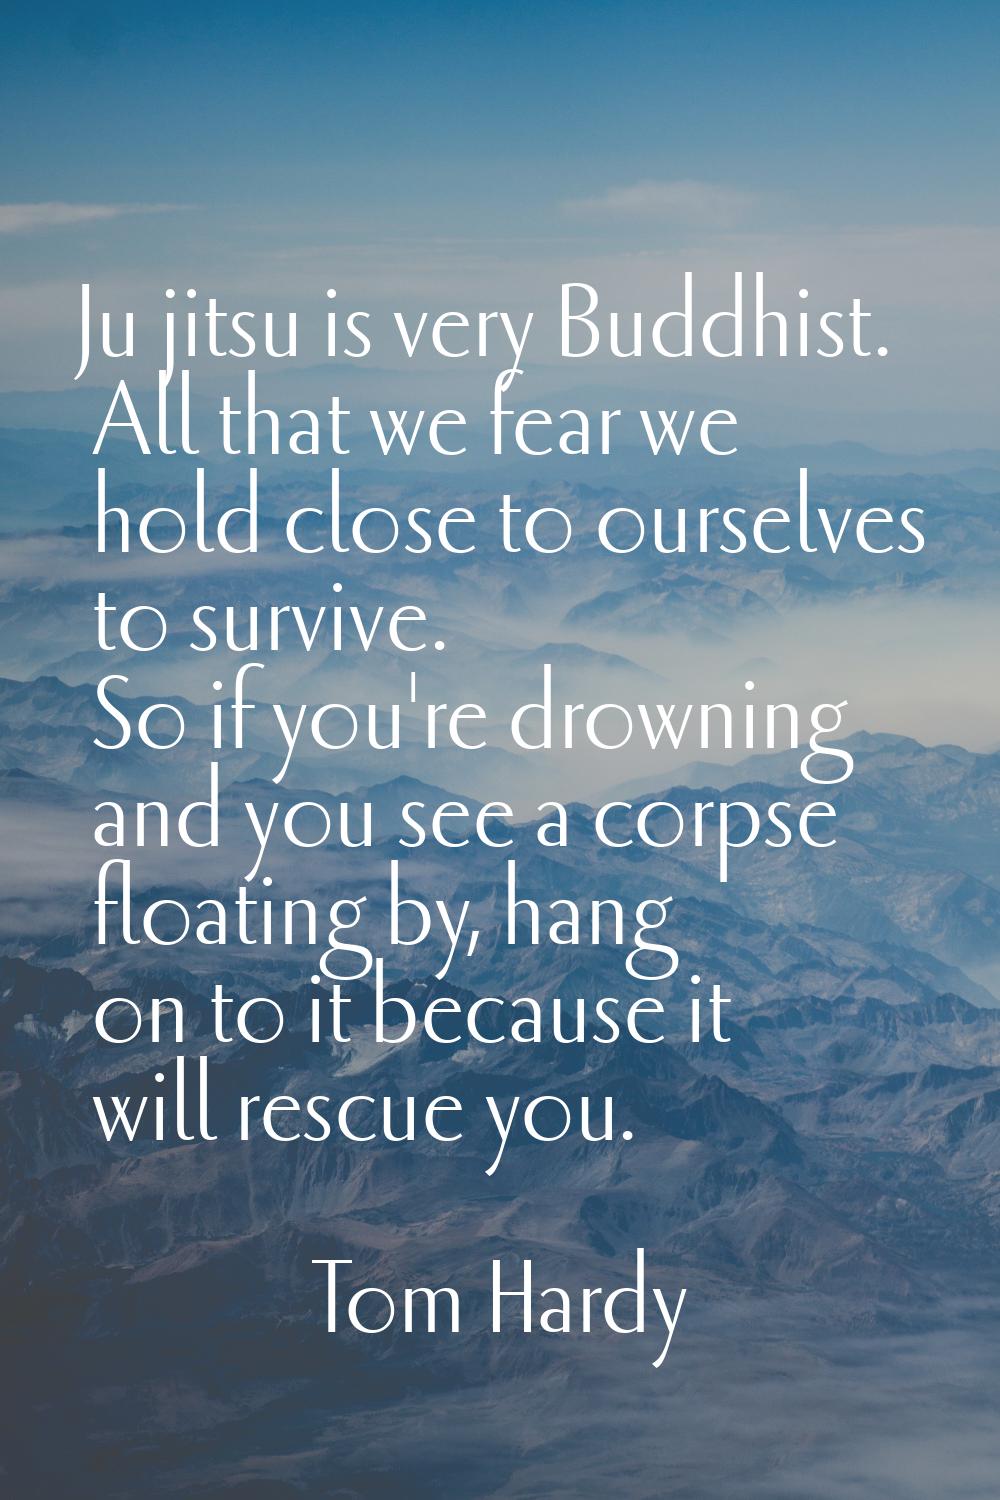 Ju jitsu is very Buddhist. All that we fear we hold close to ourselves to survive. So if you're dro